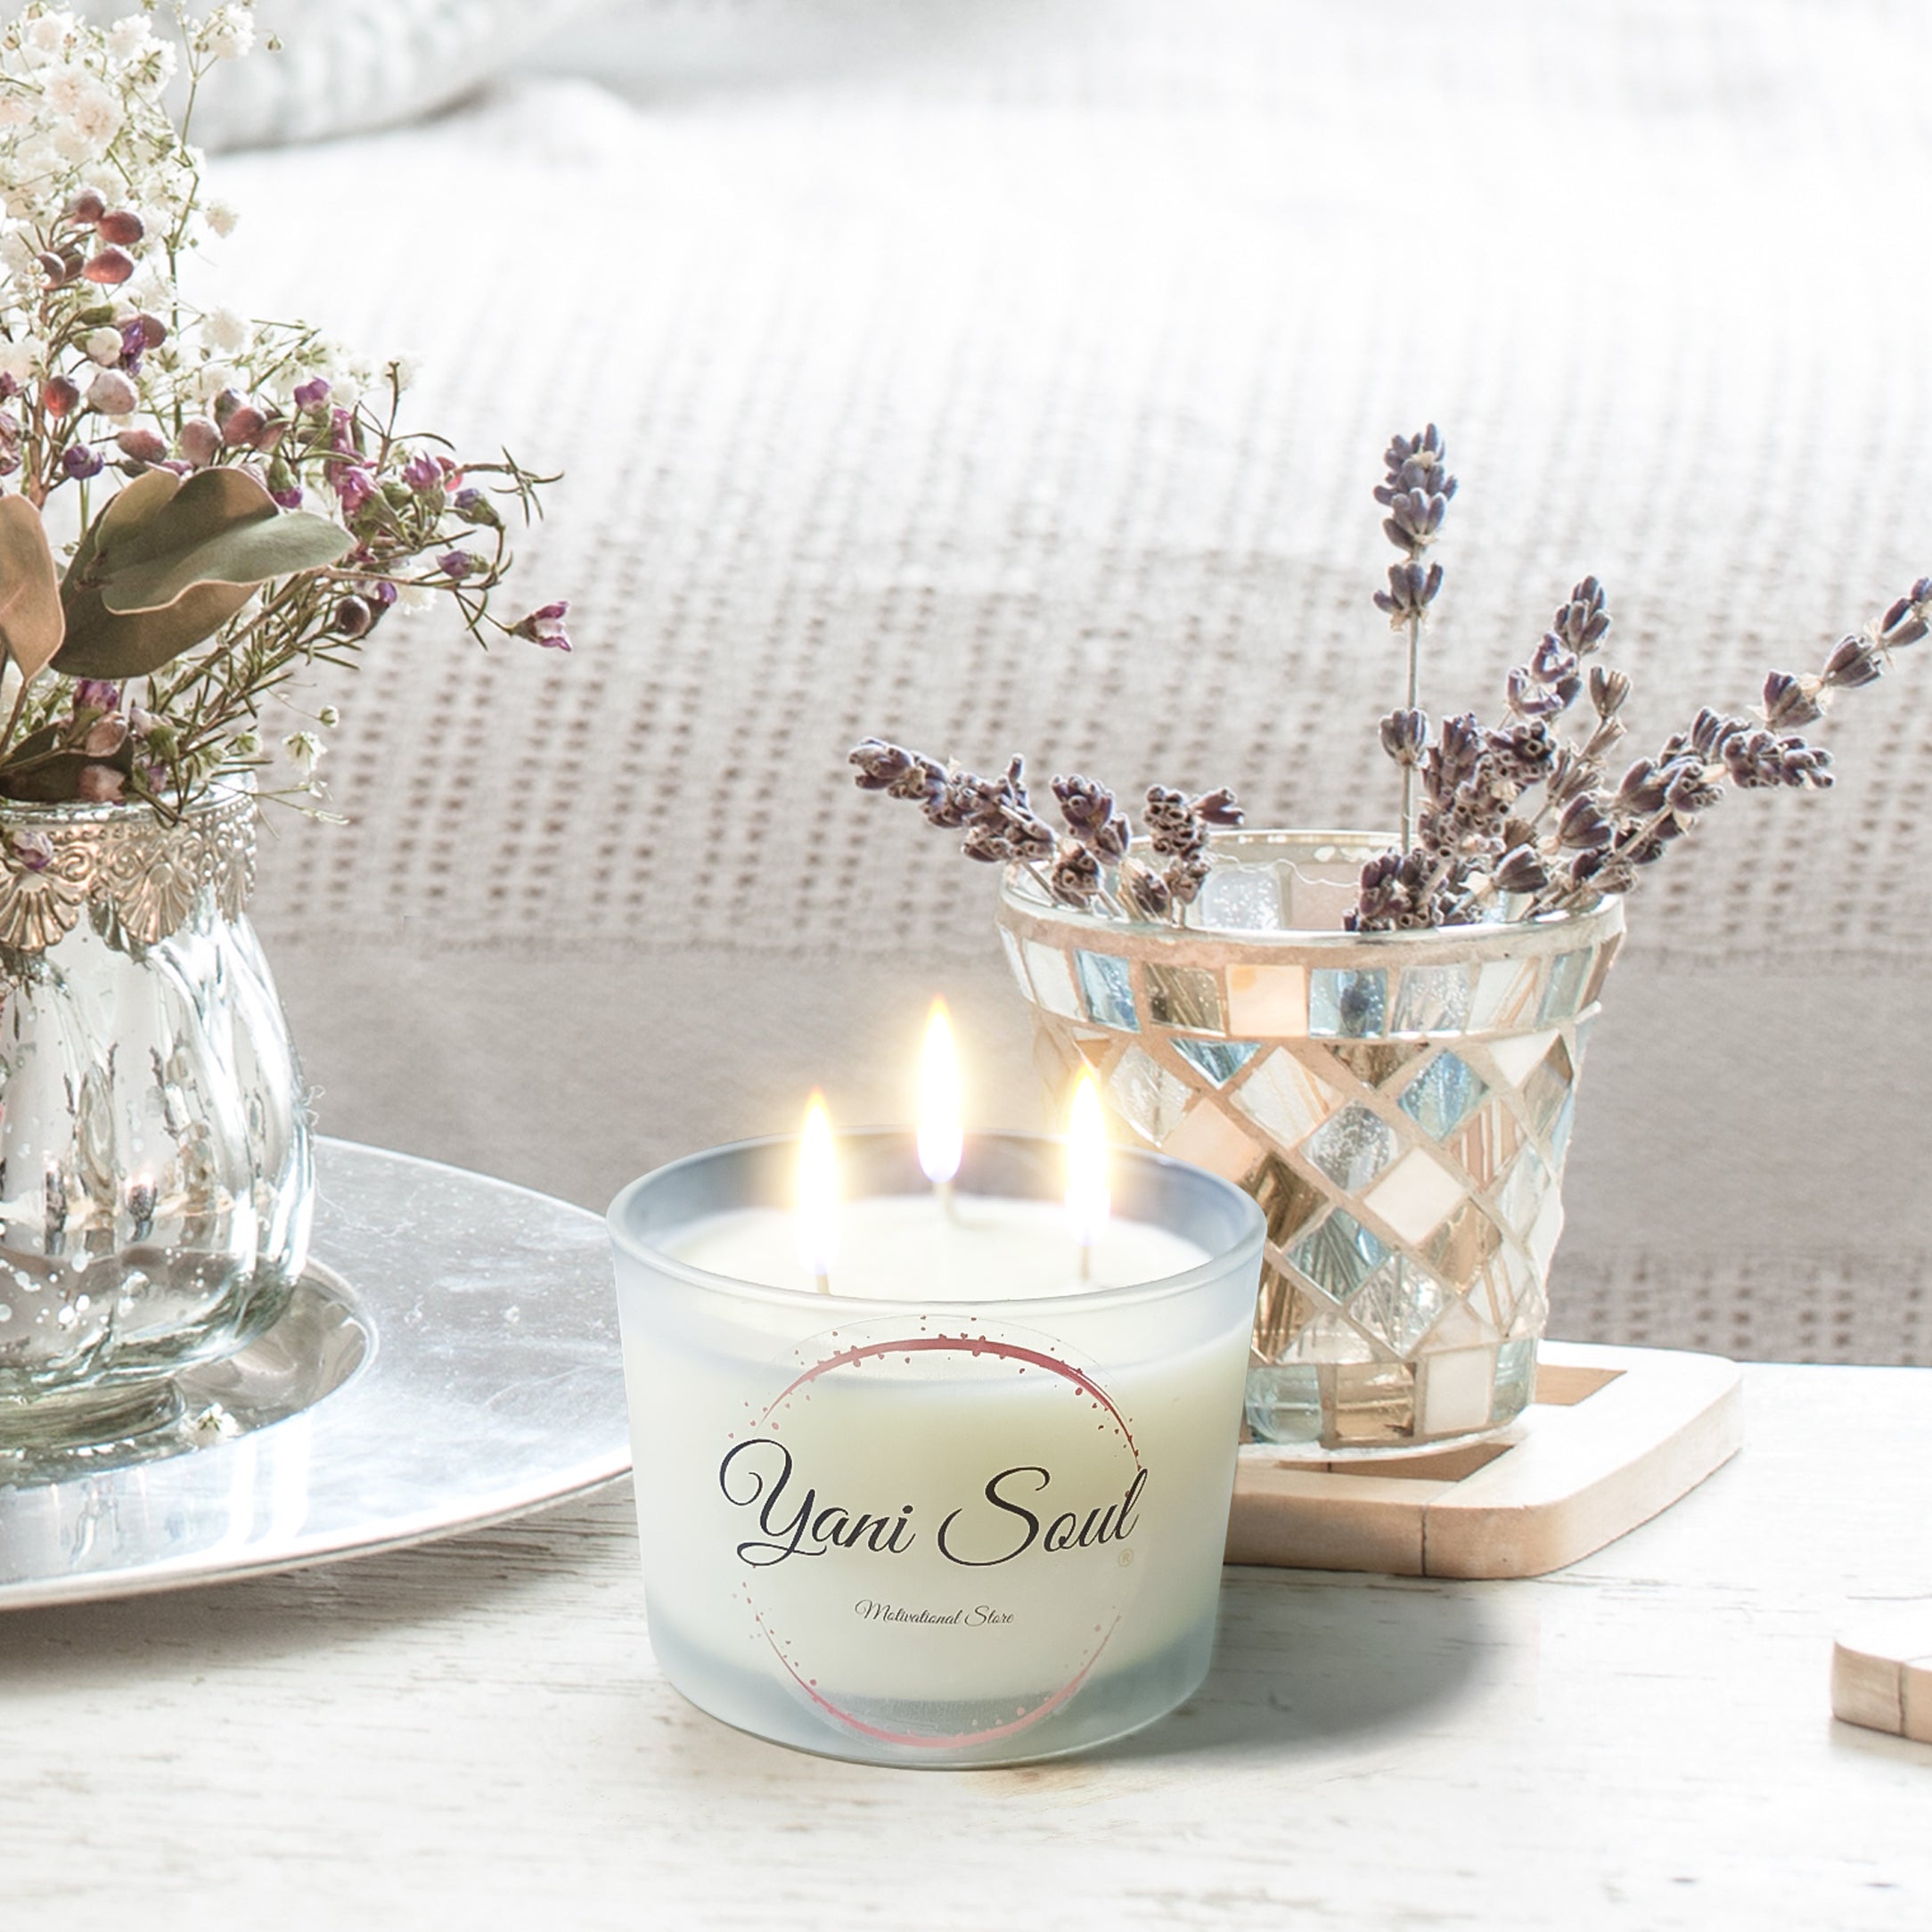 The Sensual Moon Soy Wax Luxury Candles  Scent to Lift Your Spirit & Transform the Room